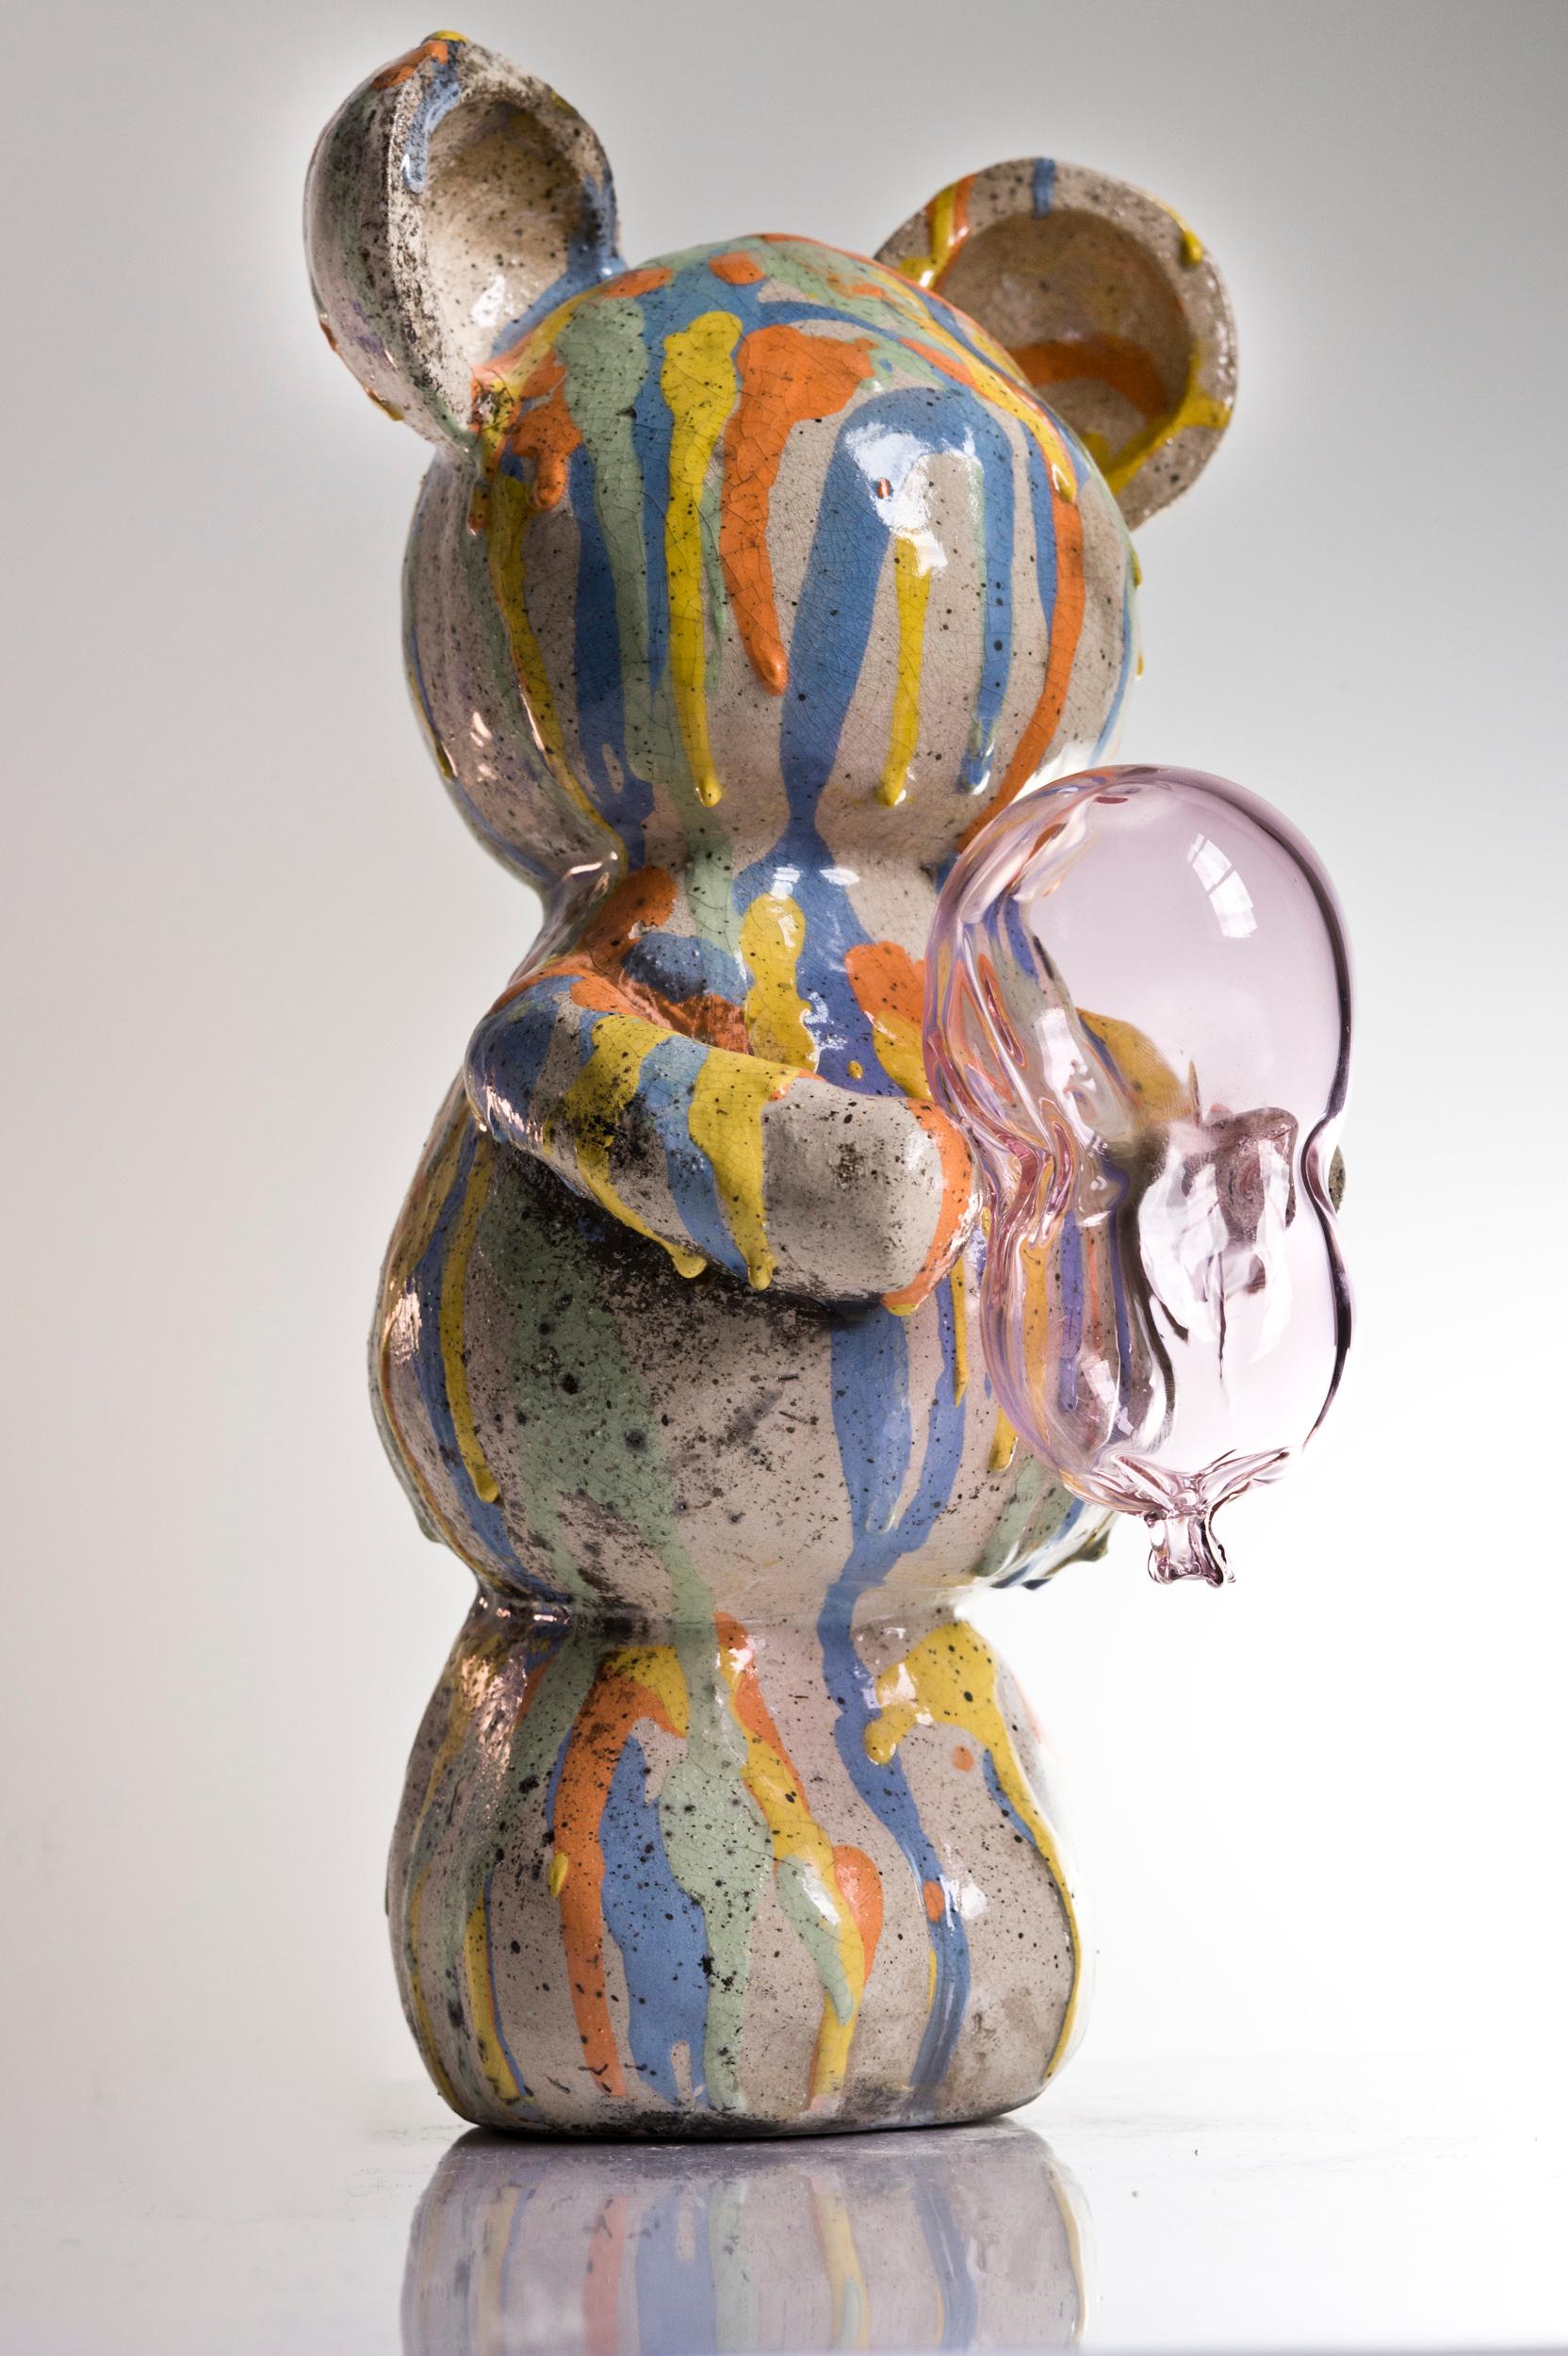 A Messy Teddy with a balloon.

Agustina Garrigou is a designer and a ceramist. Born in Buenos Aires, Argentina and raised by a family in love with nature and a particular sense of humor. She studied industrial design and then moved to Barcelona,